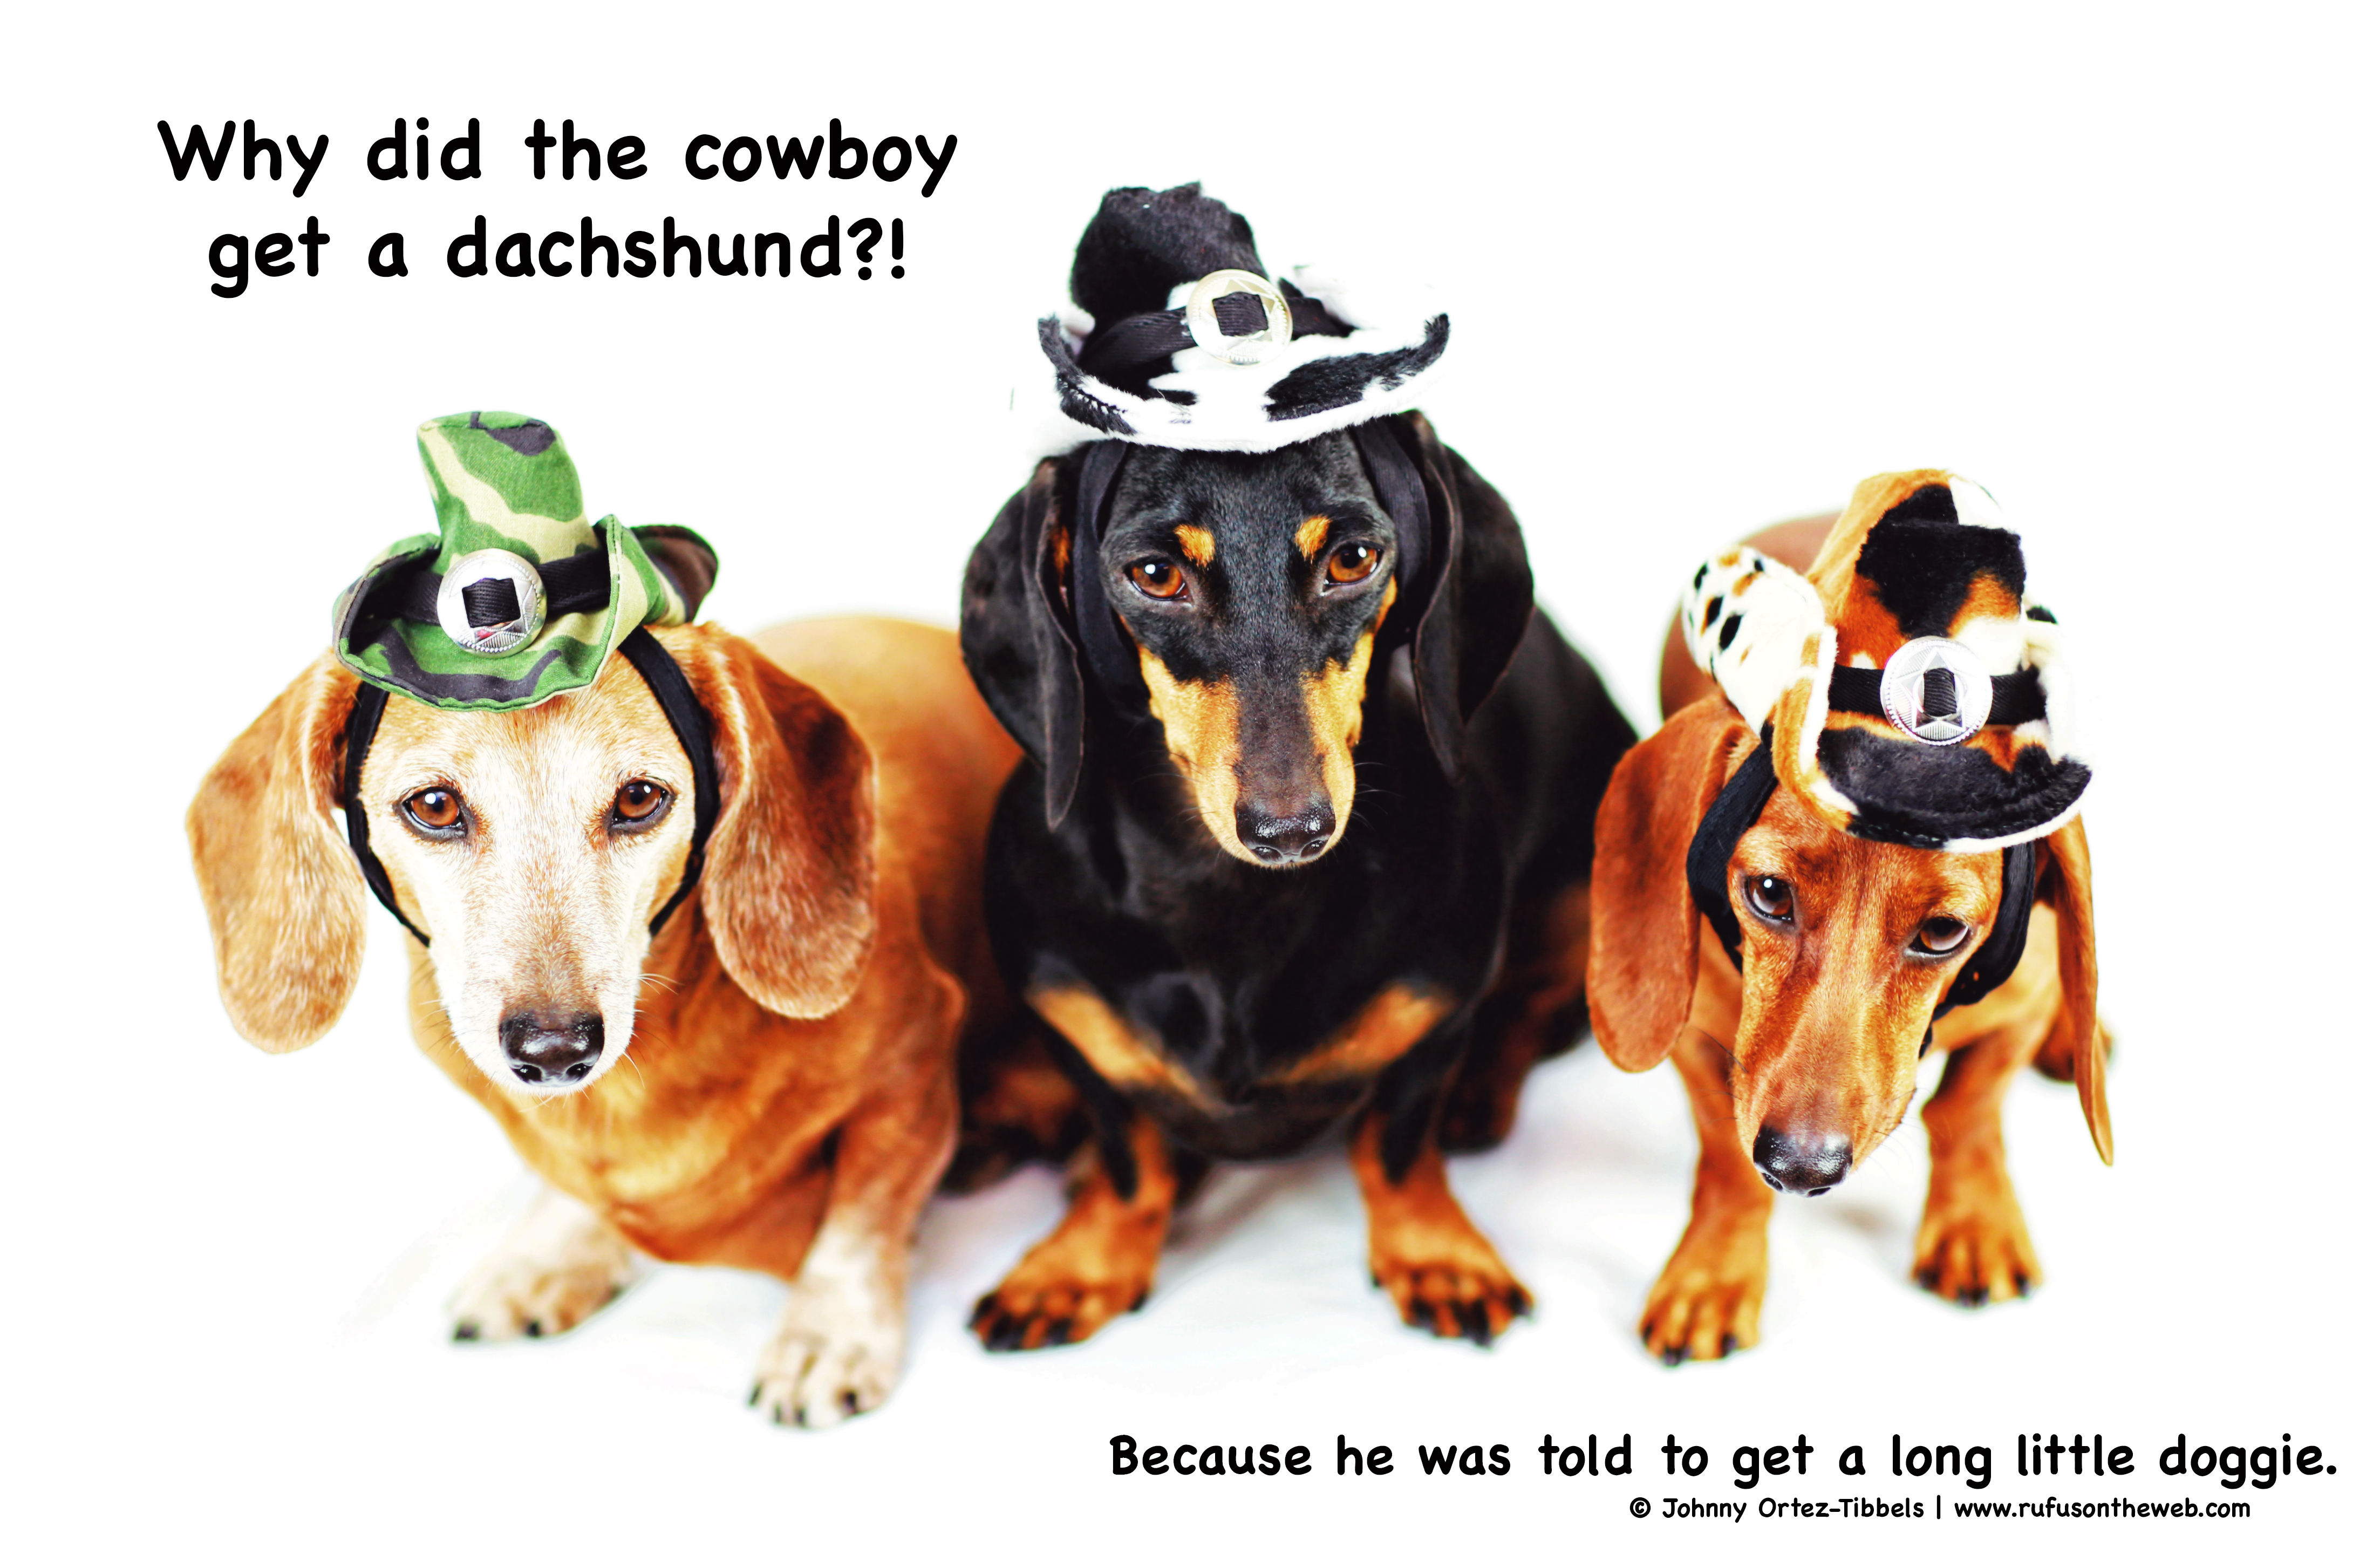 METAL MAGNET Why Cowboy Adopt Dachshund To Get A Long Little Doggie Dog Humor 